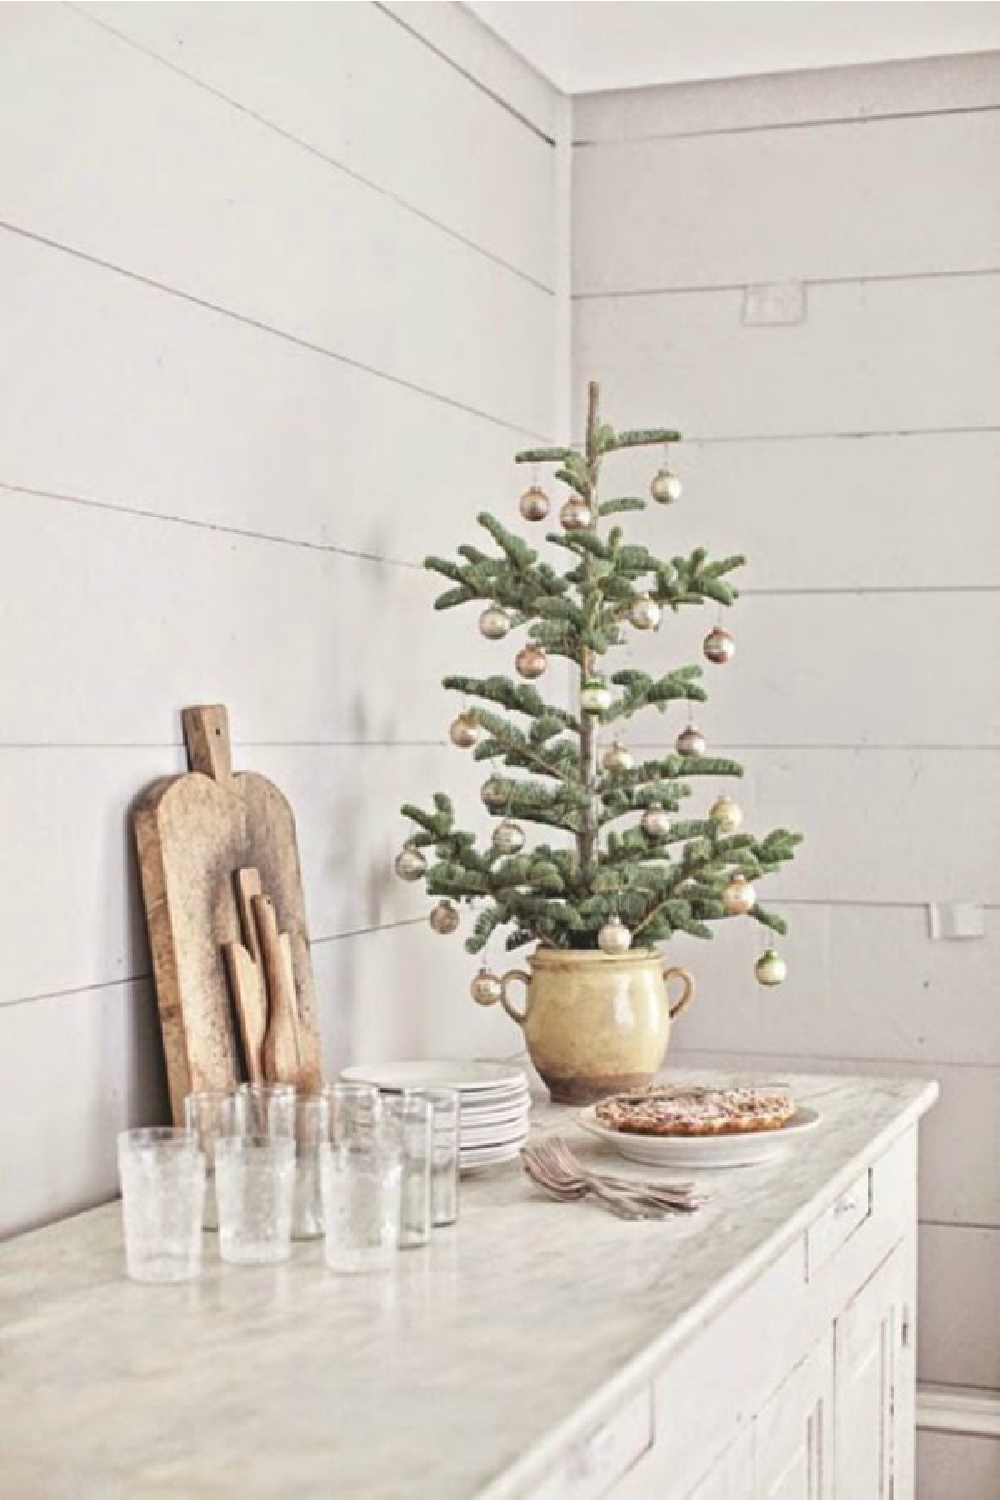 Dreamy Whites French farmhouse Christmas tree in antique jar on maarble counter. #frenchchristmas #frenchfarmhouse #vintagechristmas